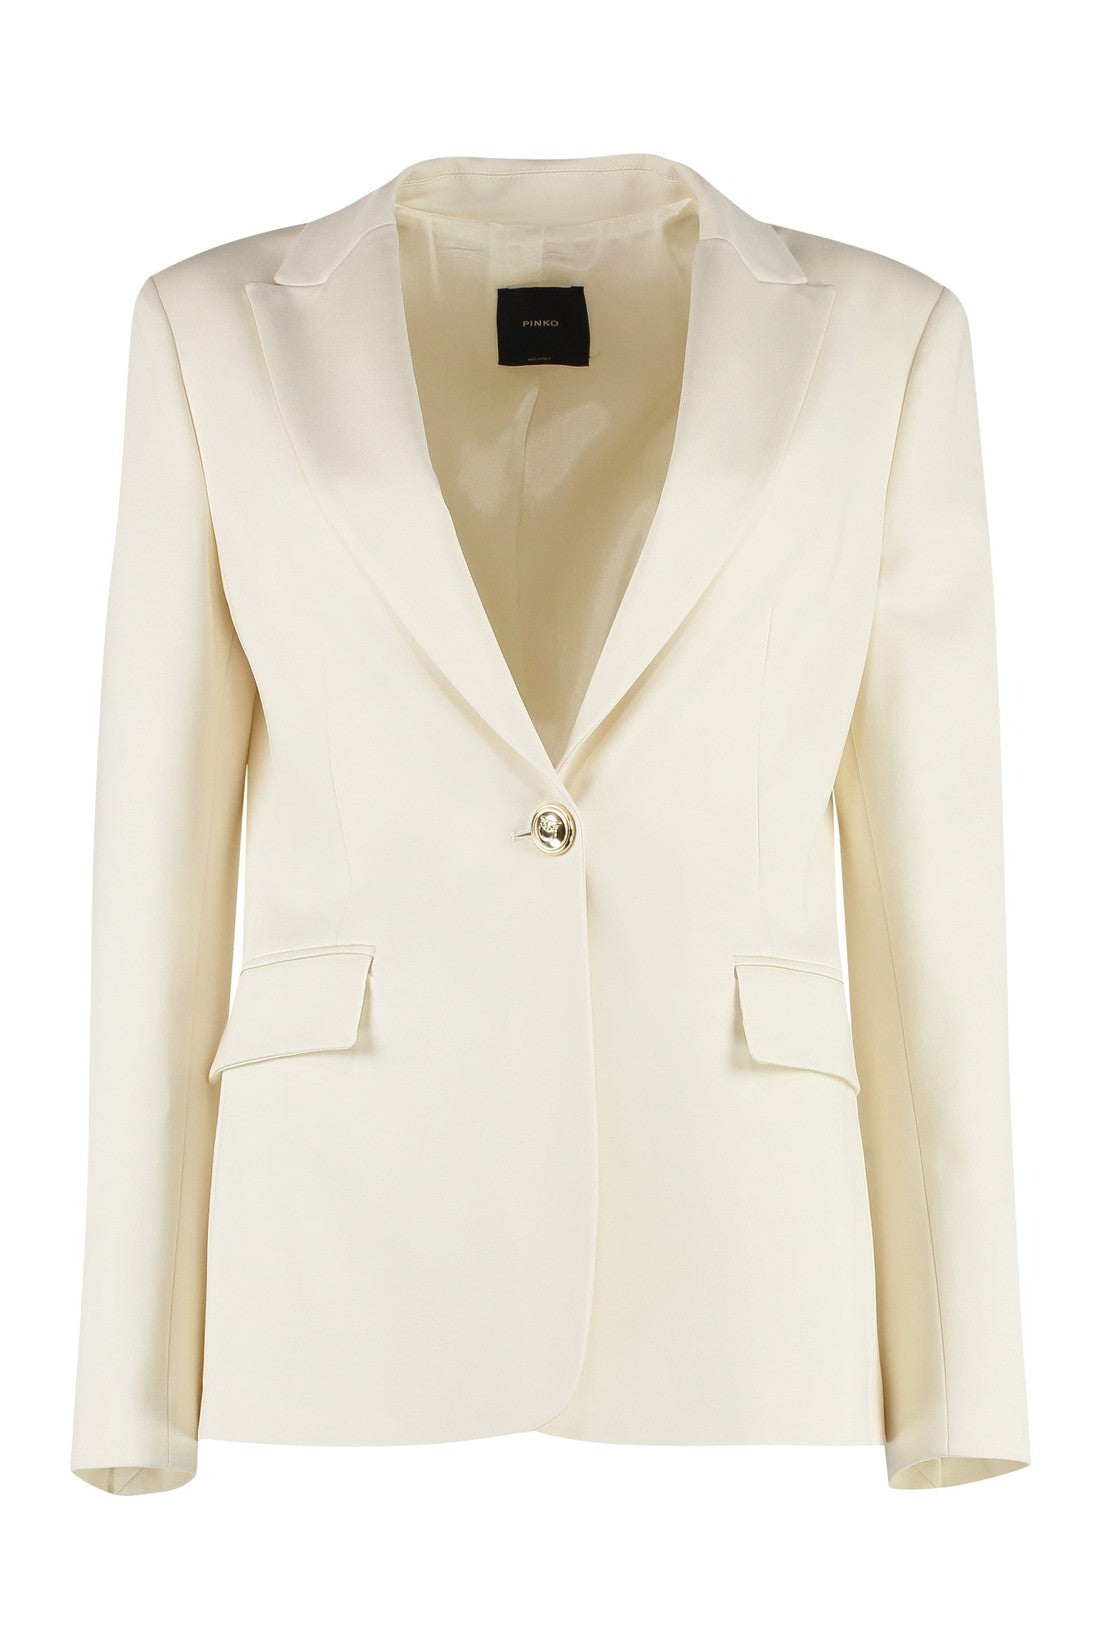 Pinko-OUTLET-SALE-Single-breasted one button jacket-ARCHIVIST